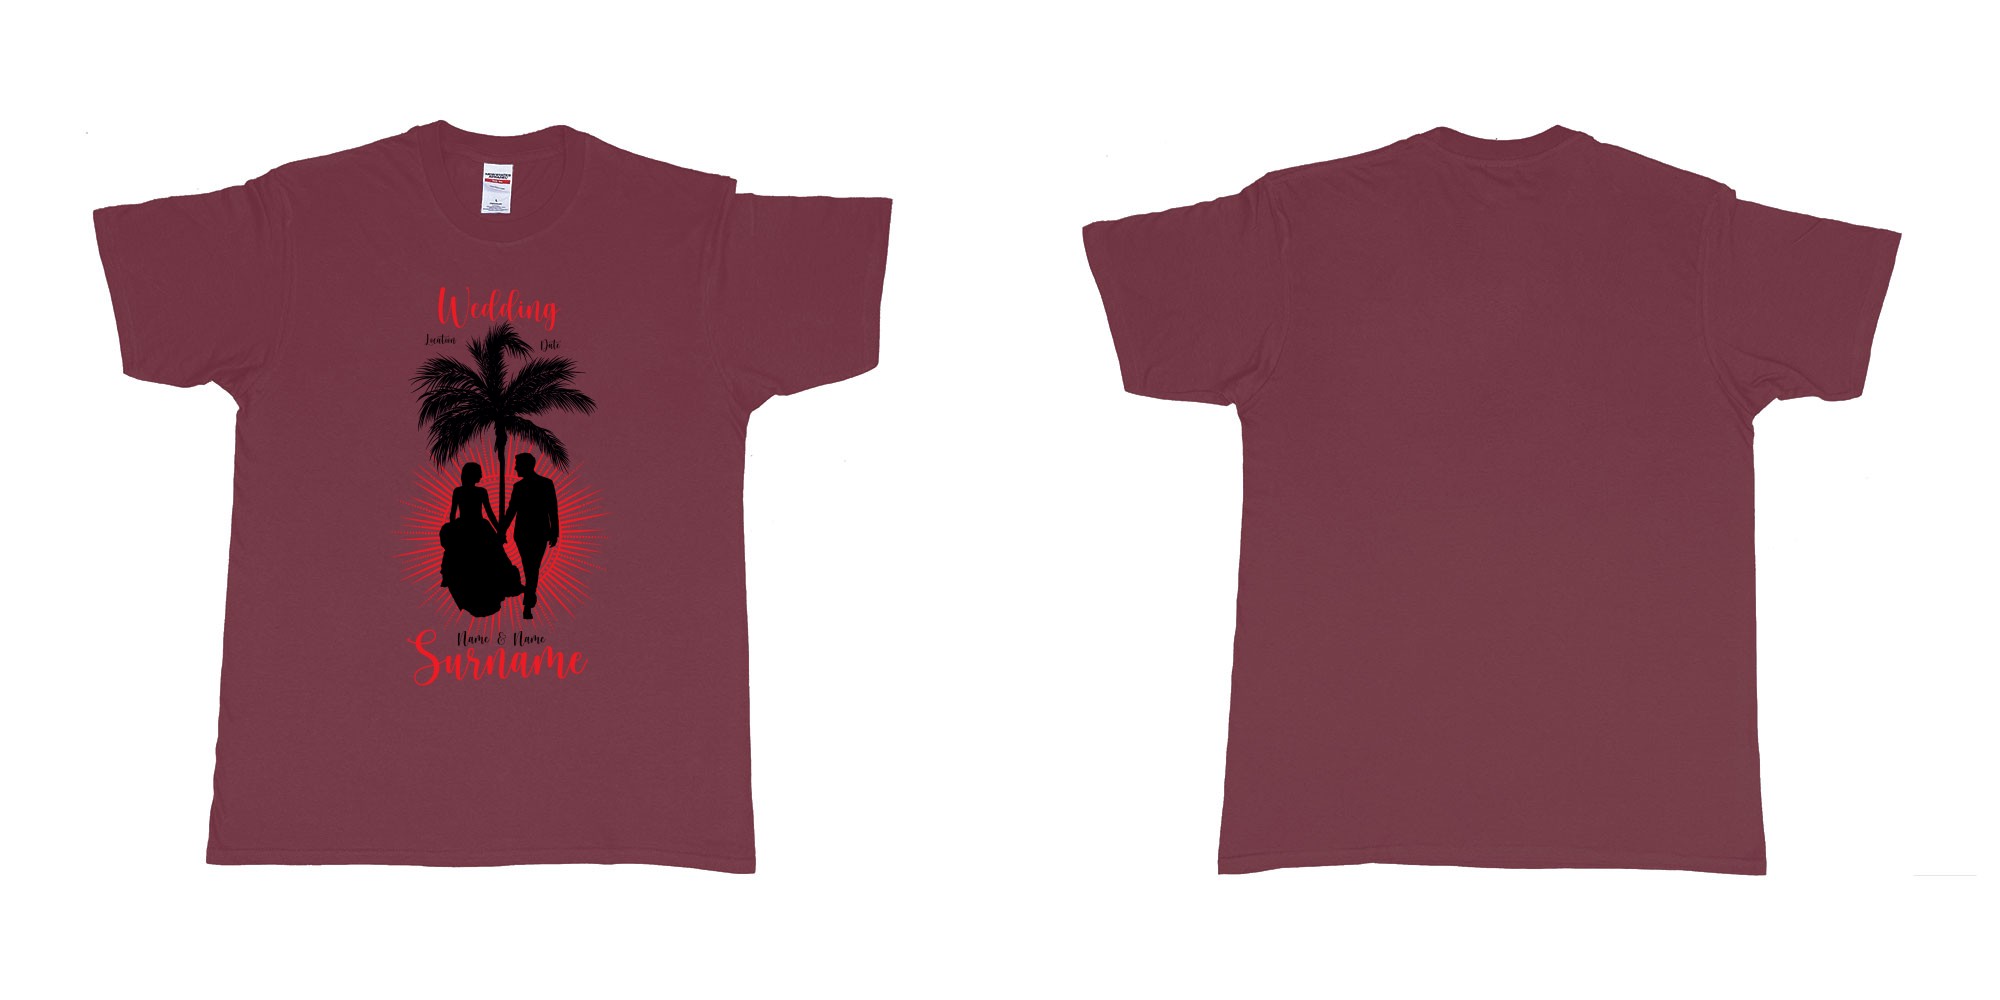 Custom tshirt design wedding palm sun bali in fabric color marron choice your own text made in Bali by The Pirate Way